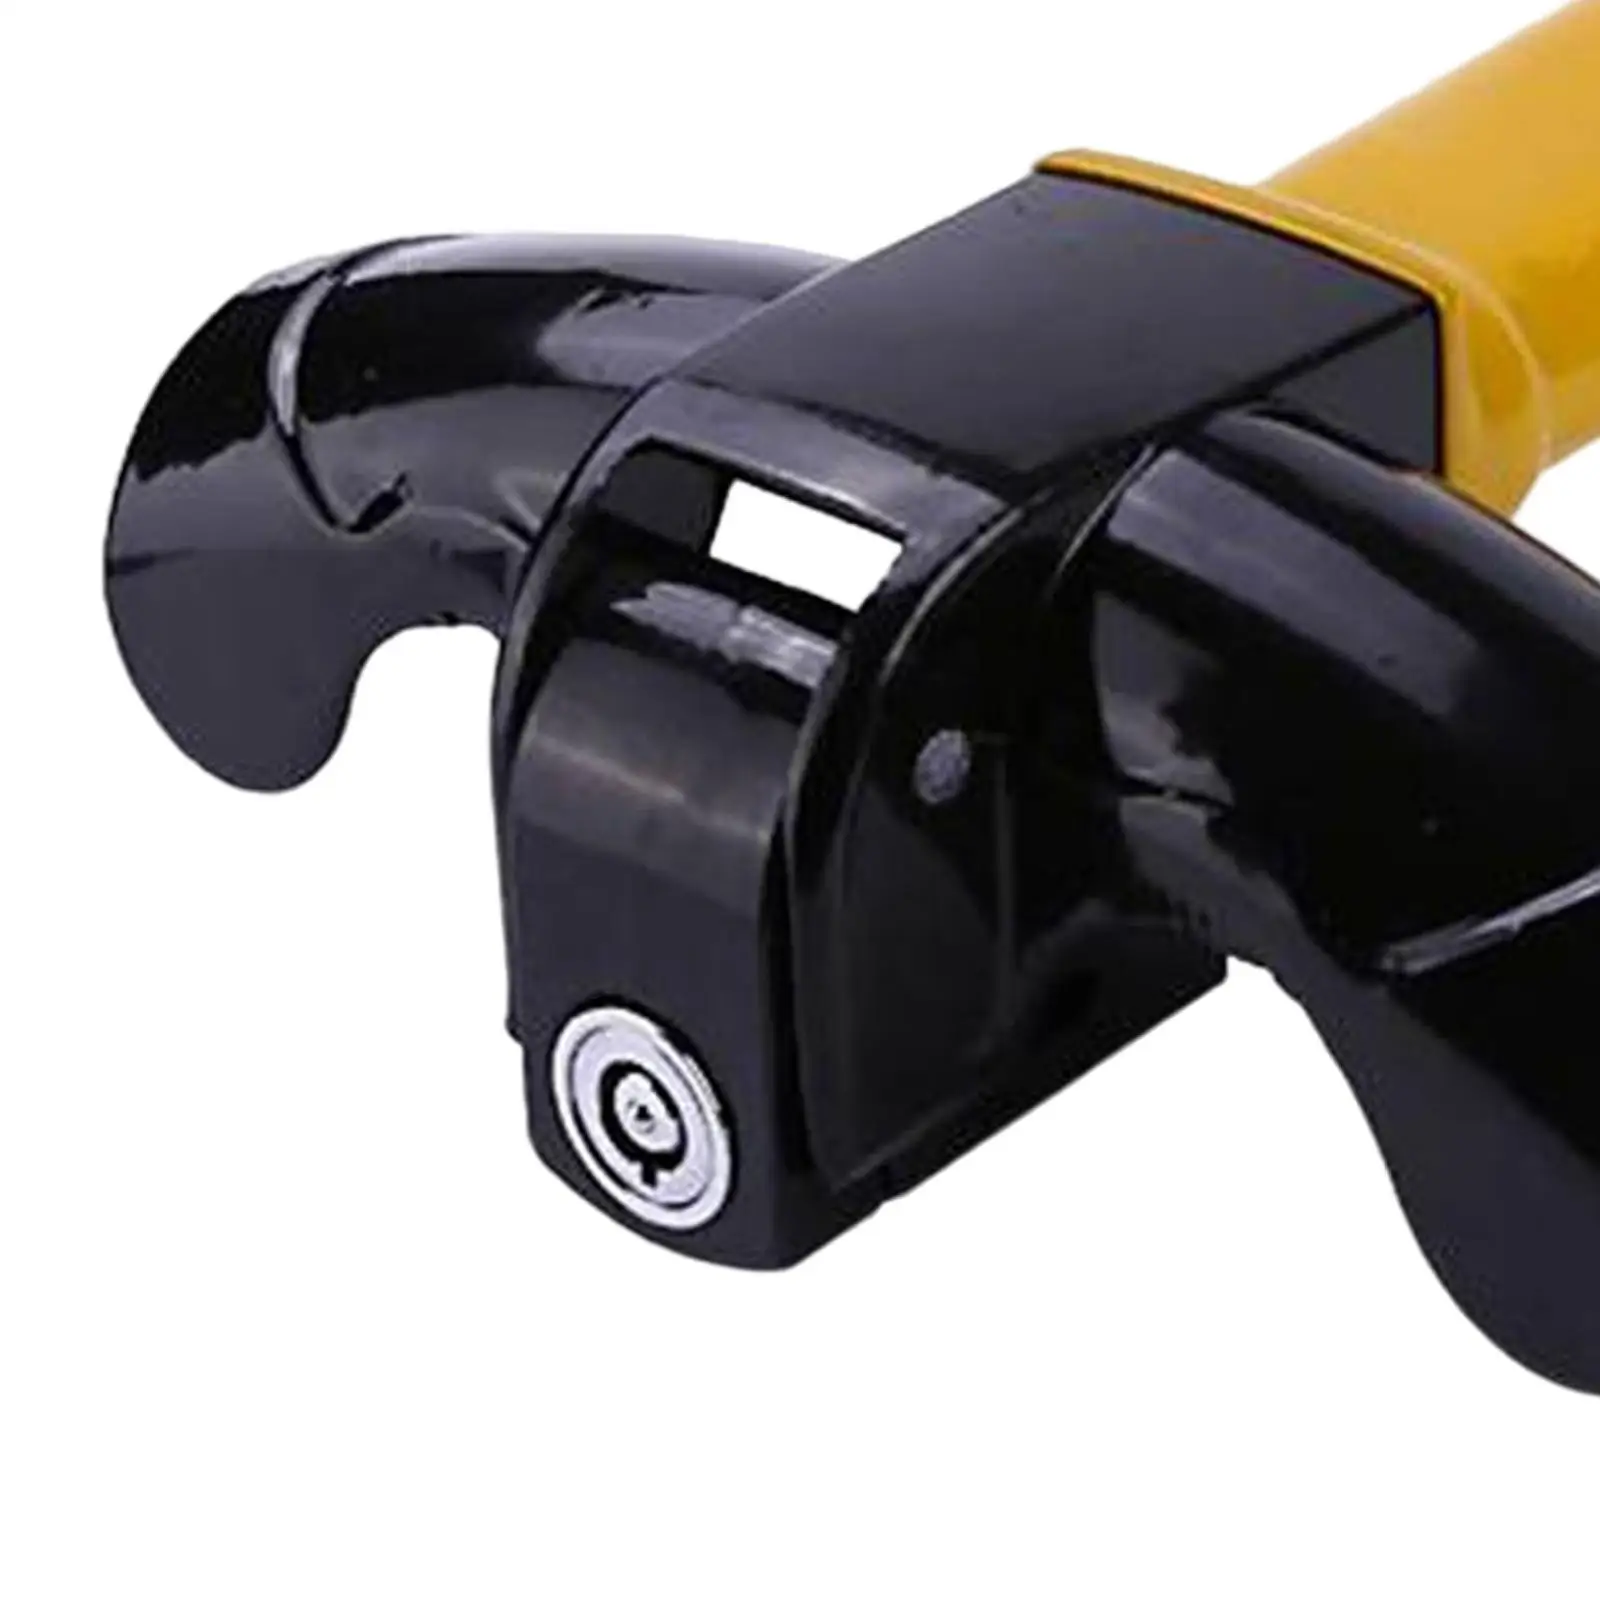 Steering Wheel Lock Tool Sturdy Anti Theft Security Lock for Vehicles